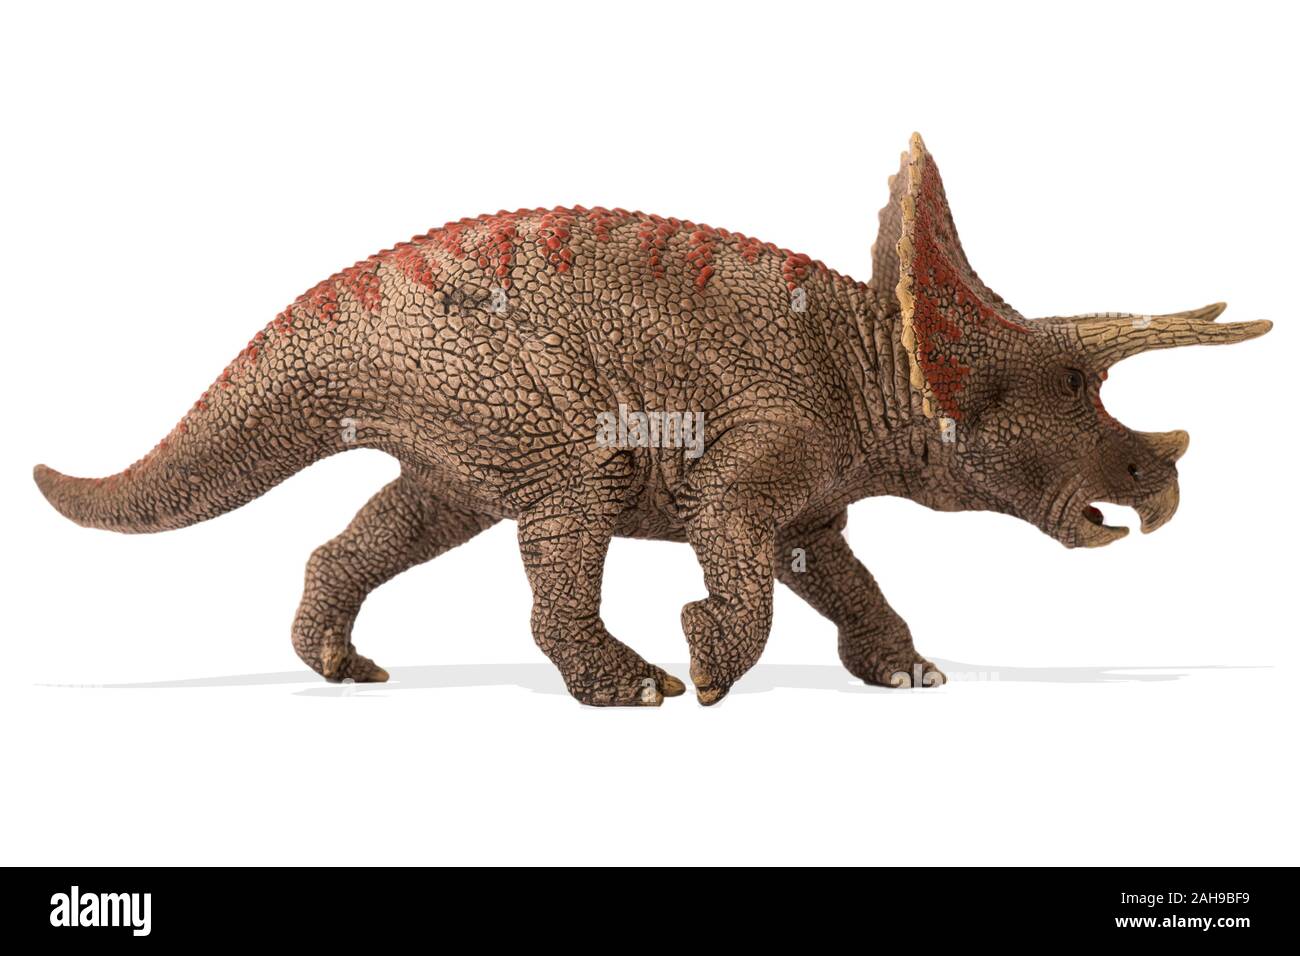 Triceratops isolated on white background. Lateral view. Triceratops is an herbivore dinosaur with three hornslived in cretaceous era. Image ideal for Stock Photo